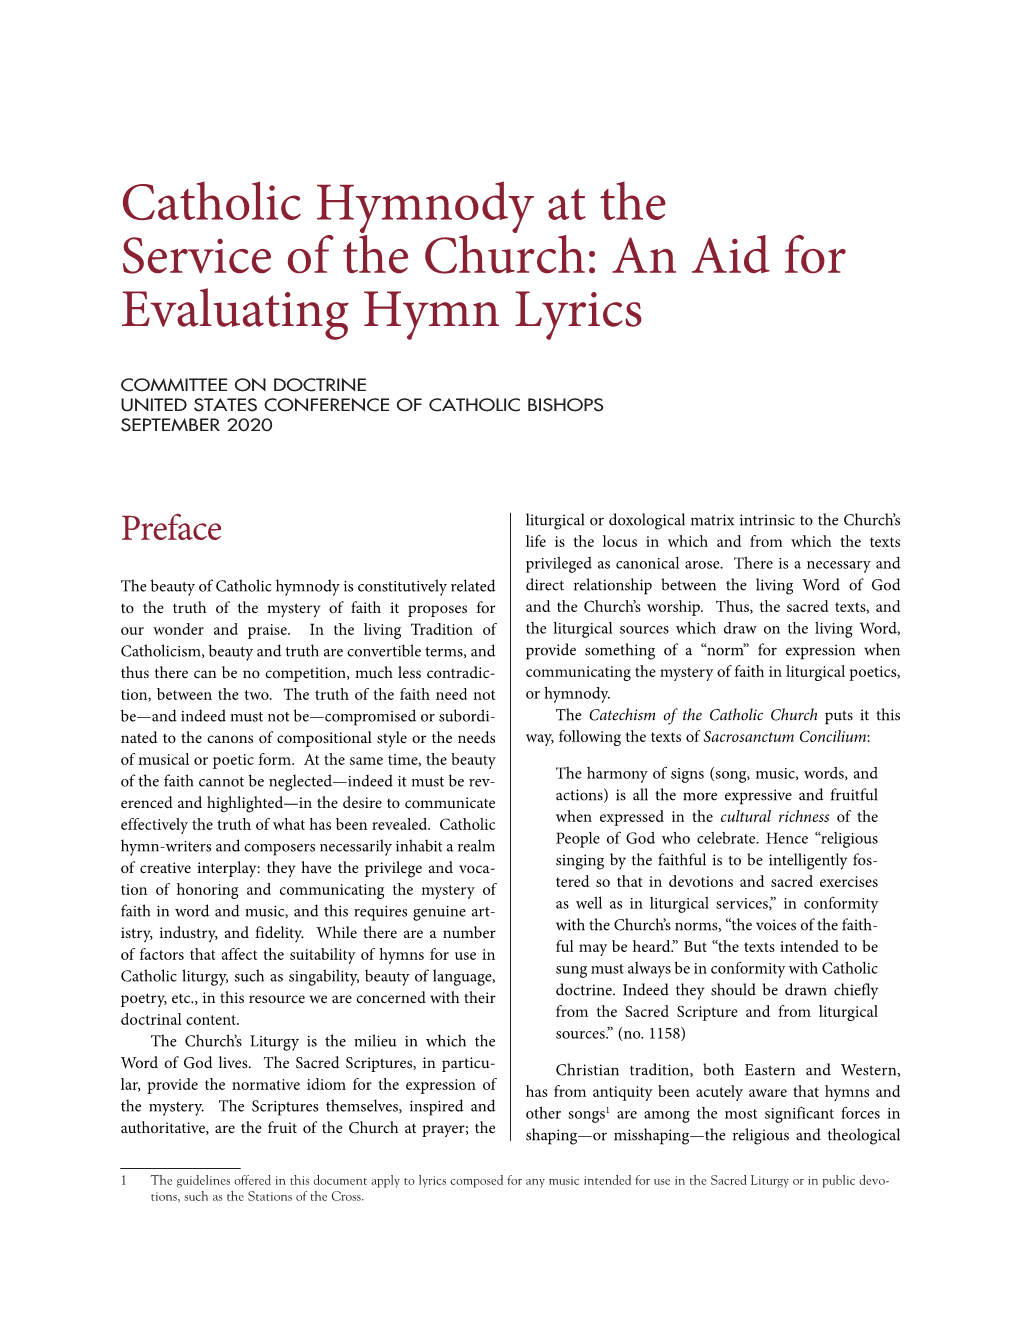 Catholic Hymnody at the Service of the Church: an Aid for Evaluating Hymn Lyrics